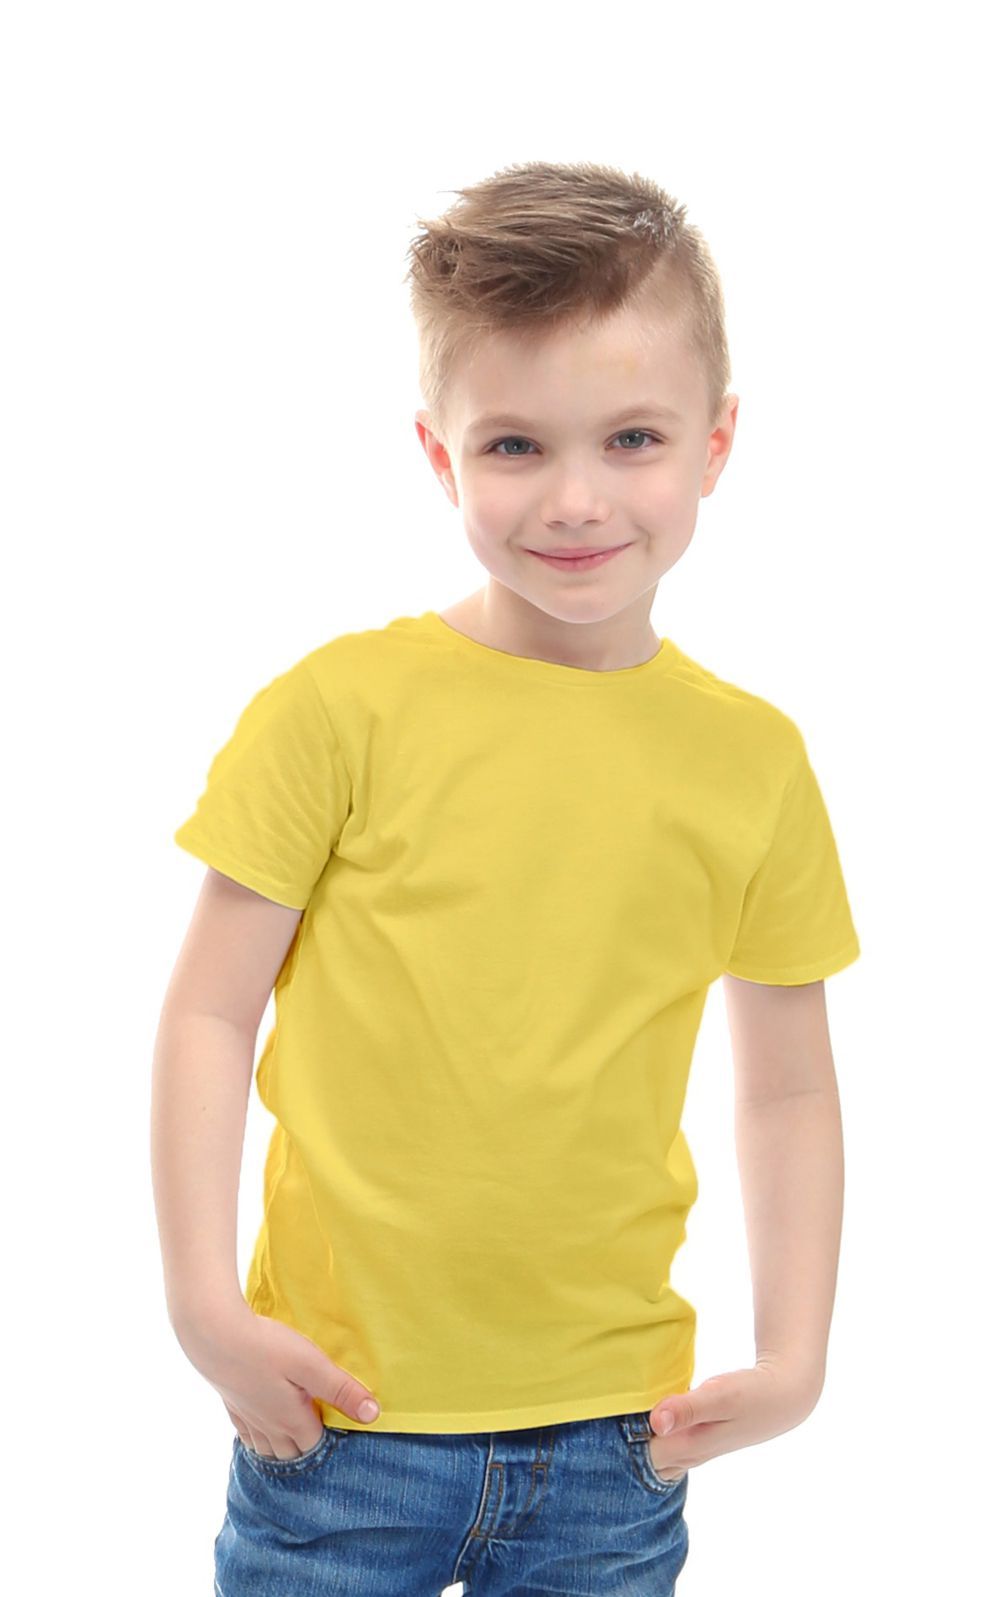 DOUBLE F ROUND NECK HALF SLEEVE YELLOW COLOR PLAIN T-SHIRT FOR BOYS